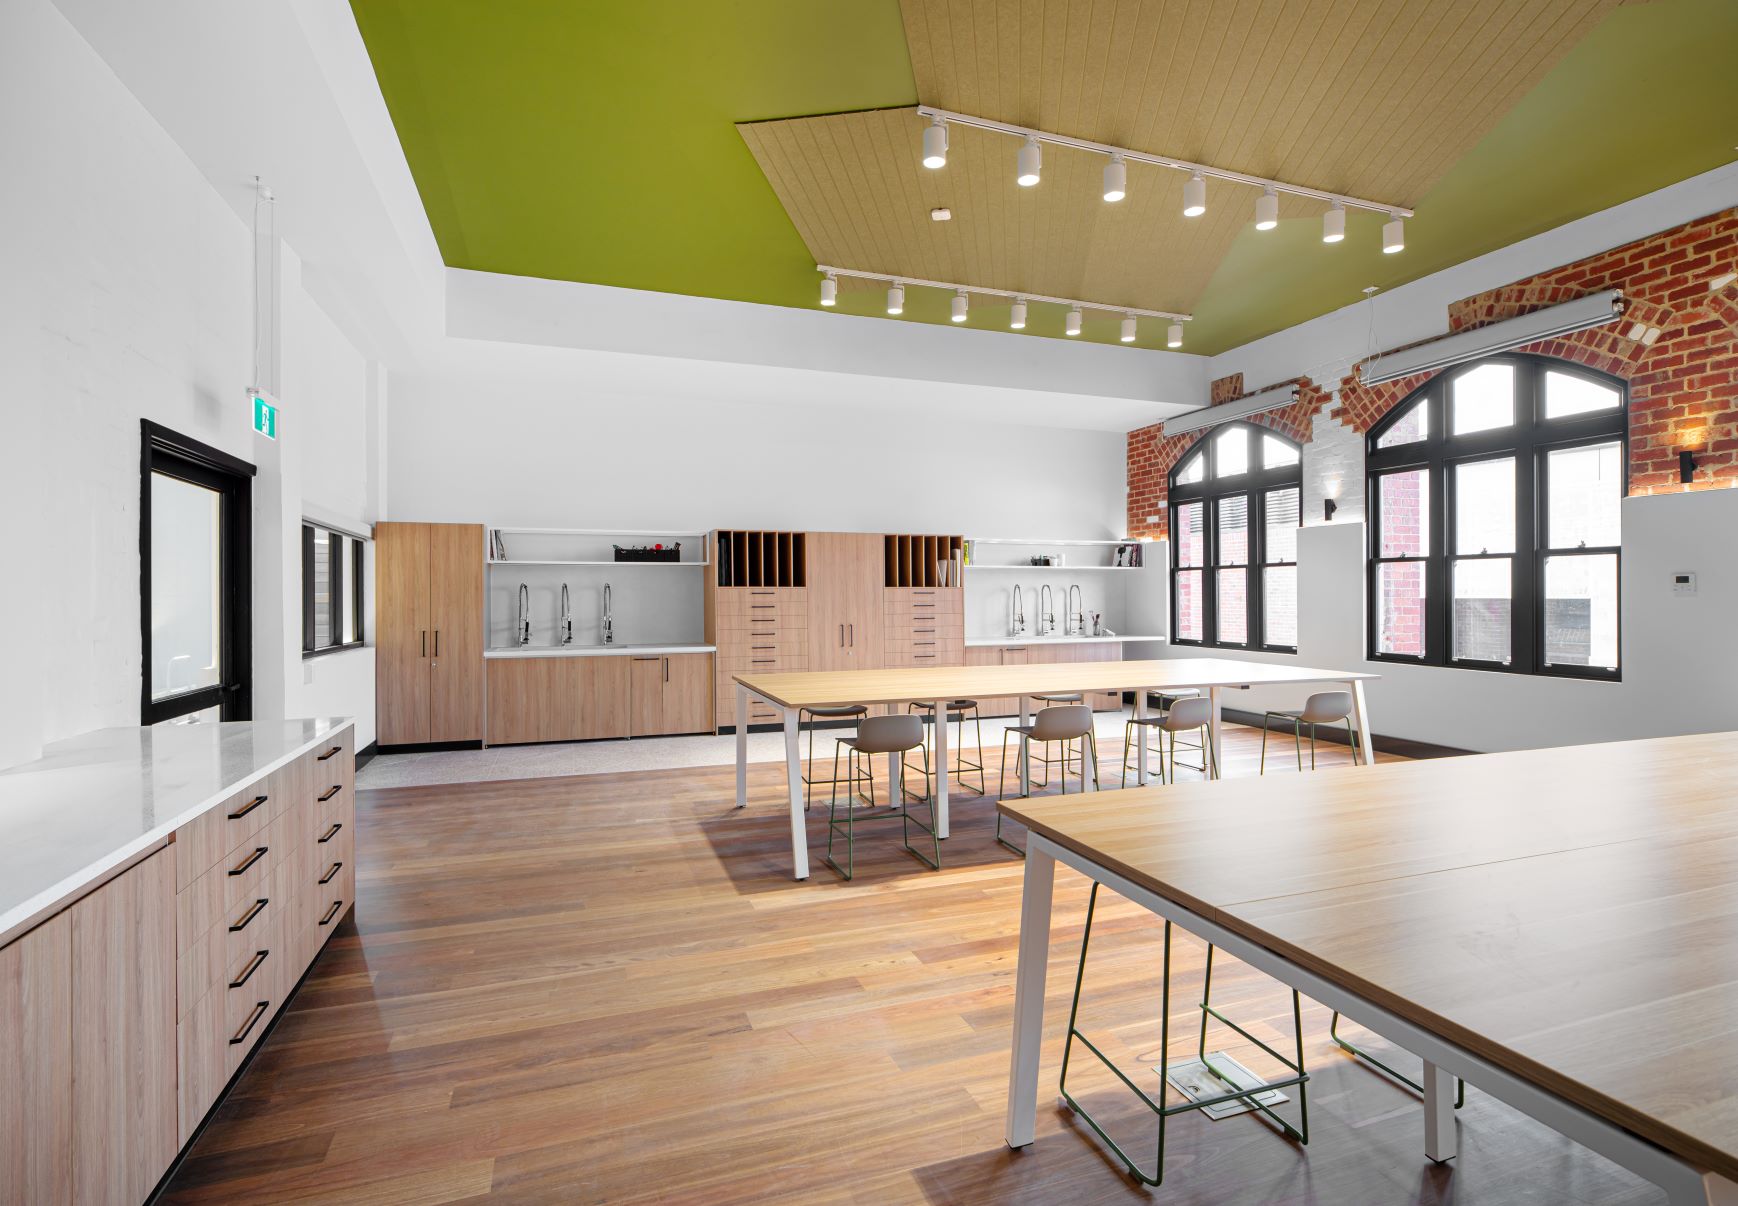 Specialist art learning space at school with wooden floors, high ceilings and large tables